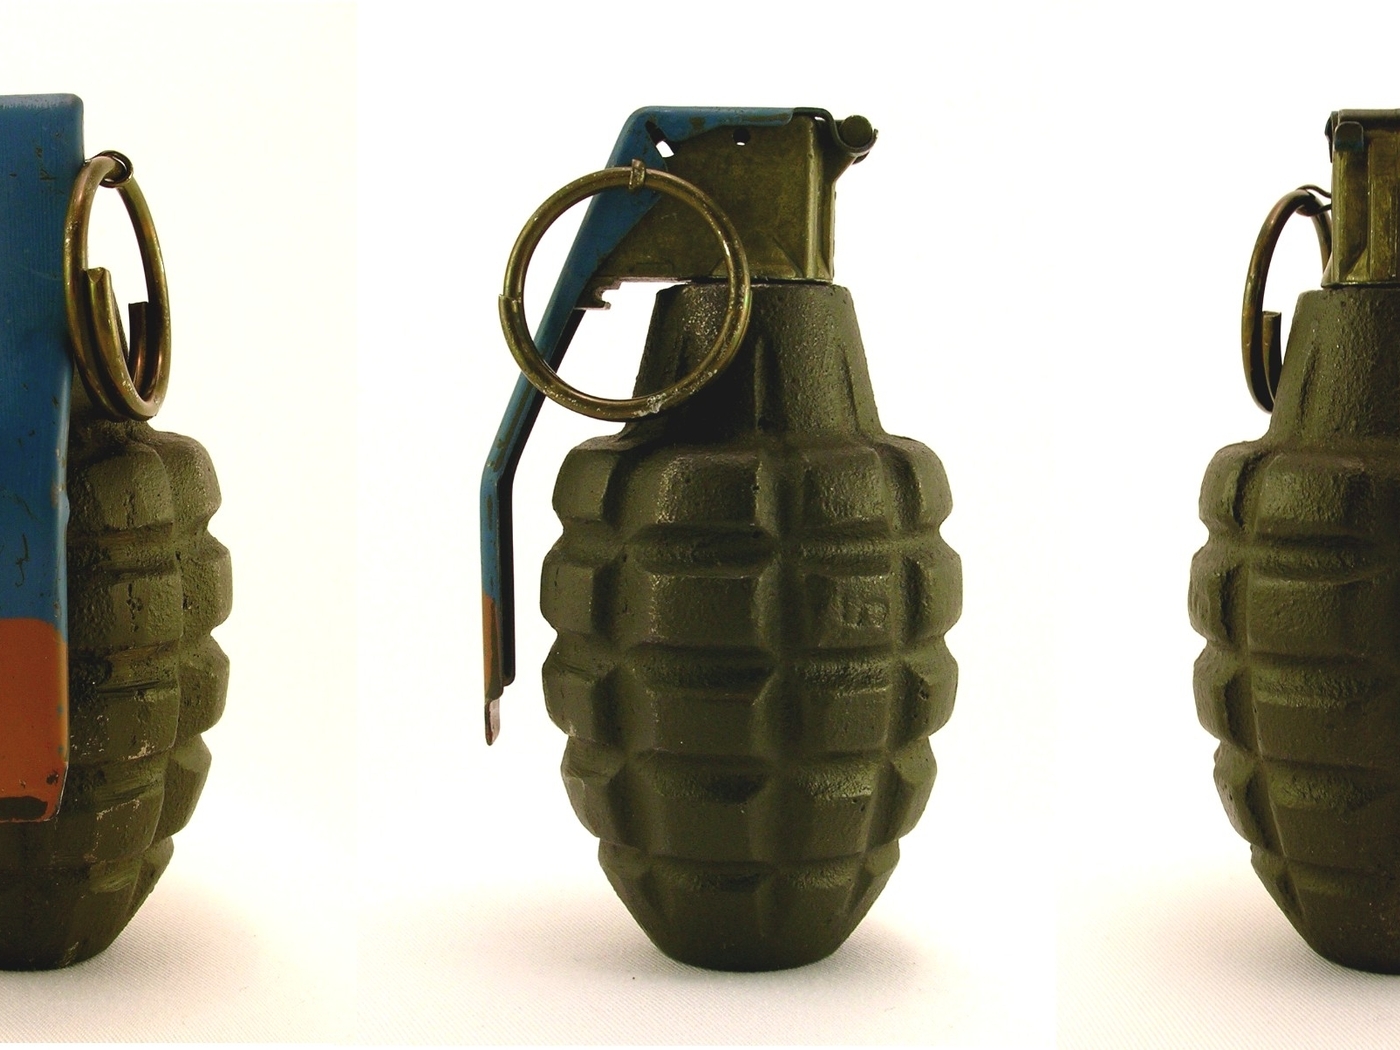 Image: Grenade, Mk2A1, ring, receipt, manual, lever